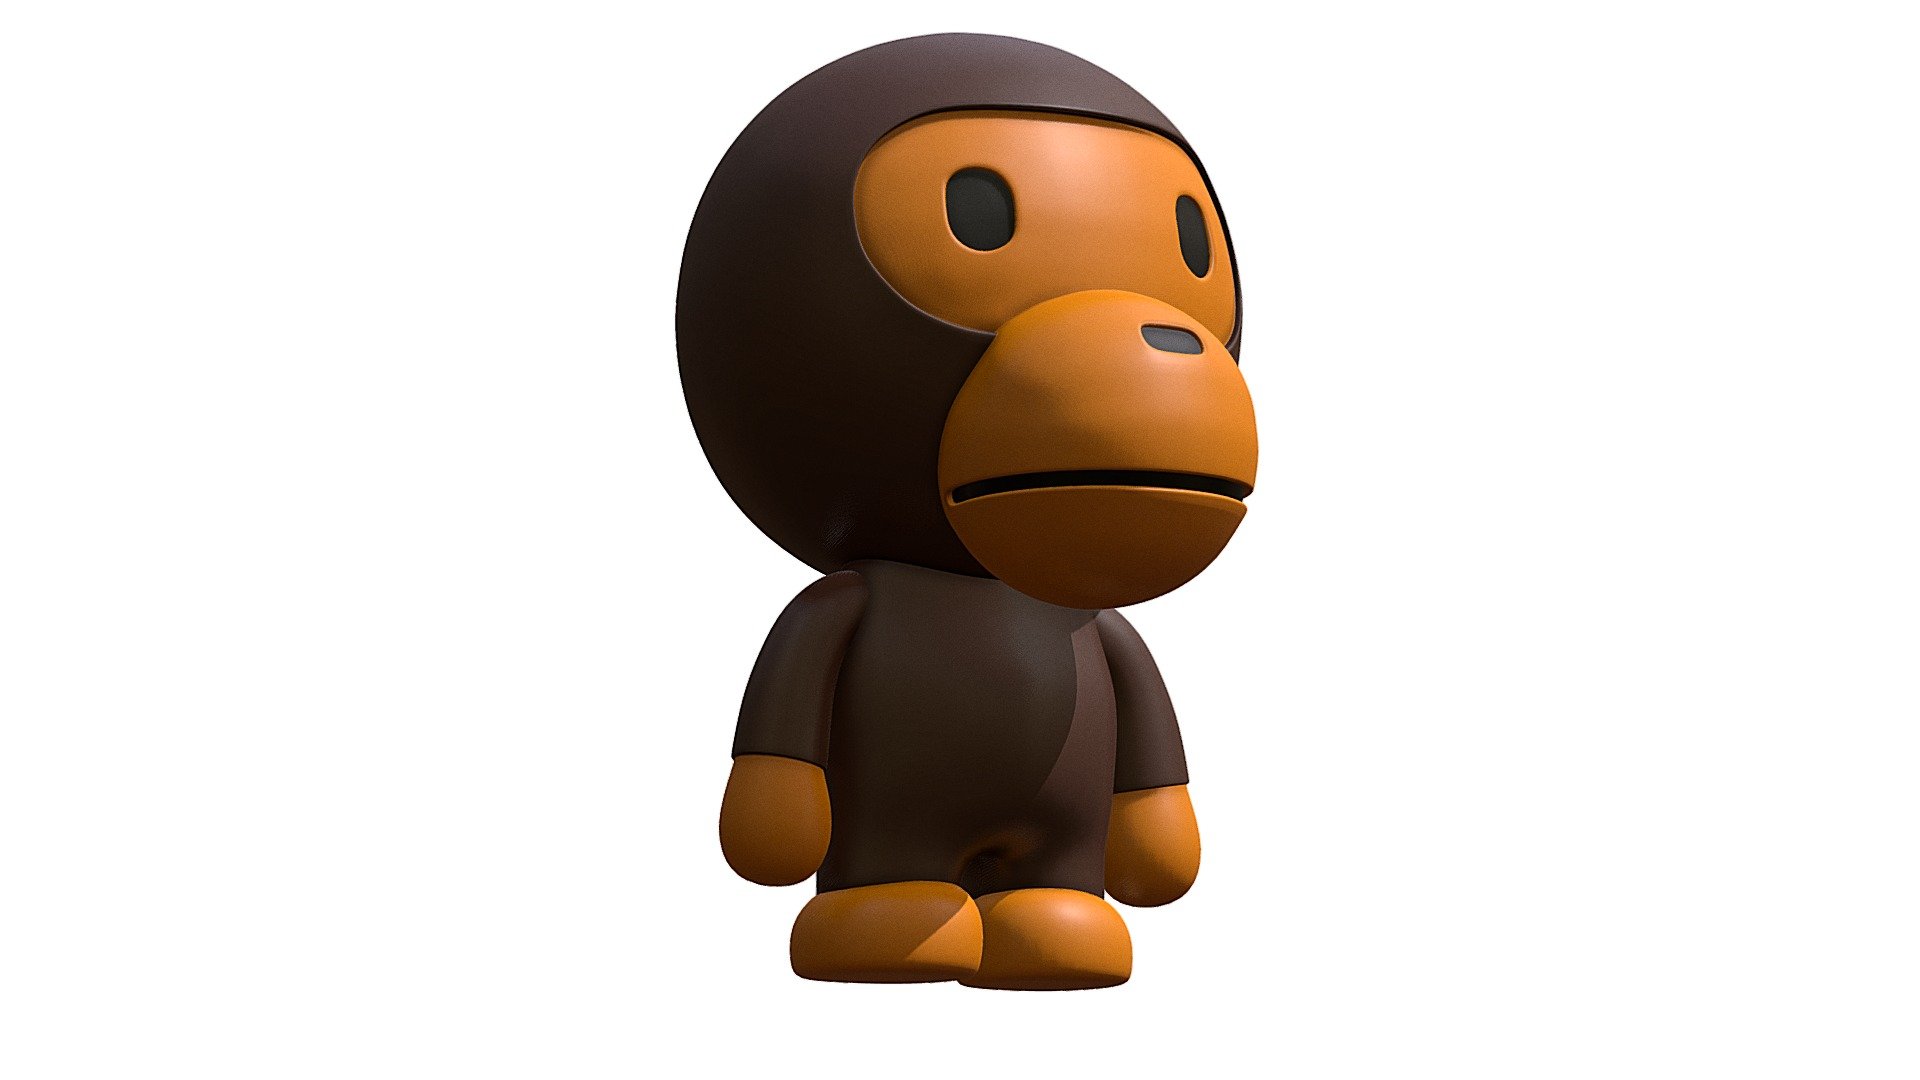 For 3D printing

&ldquo;Bape Milo is the beloved mascot of the Japanese streetwear brand A Bathing Ape (BAPE), founded by Nigo in 1993. BAPE is known for its distinctive urban street style infused with Japanese pop culture influences, and &ldquo;Baby Milo